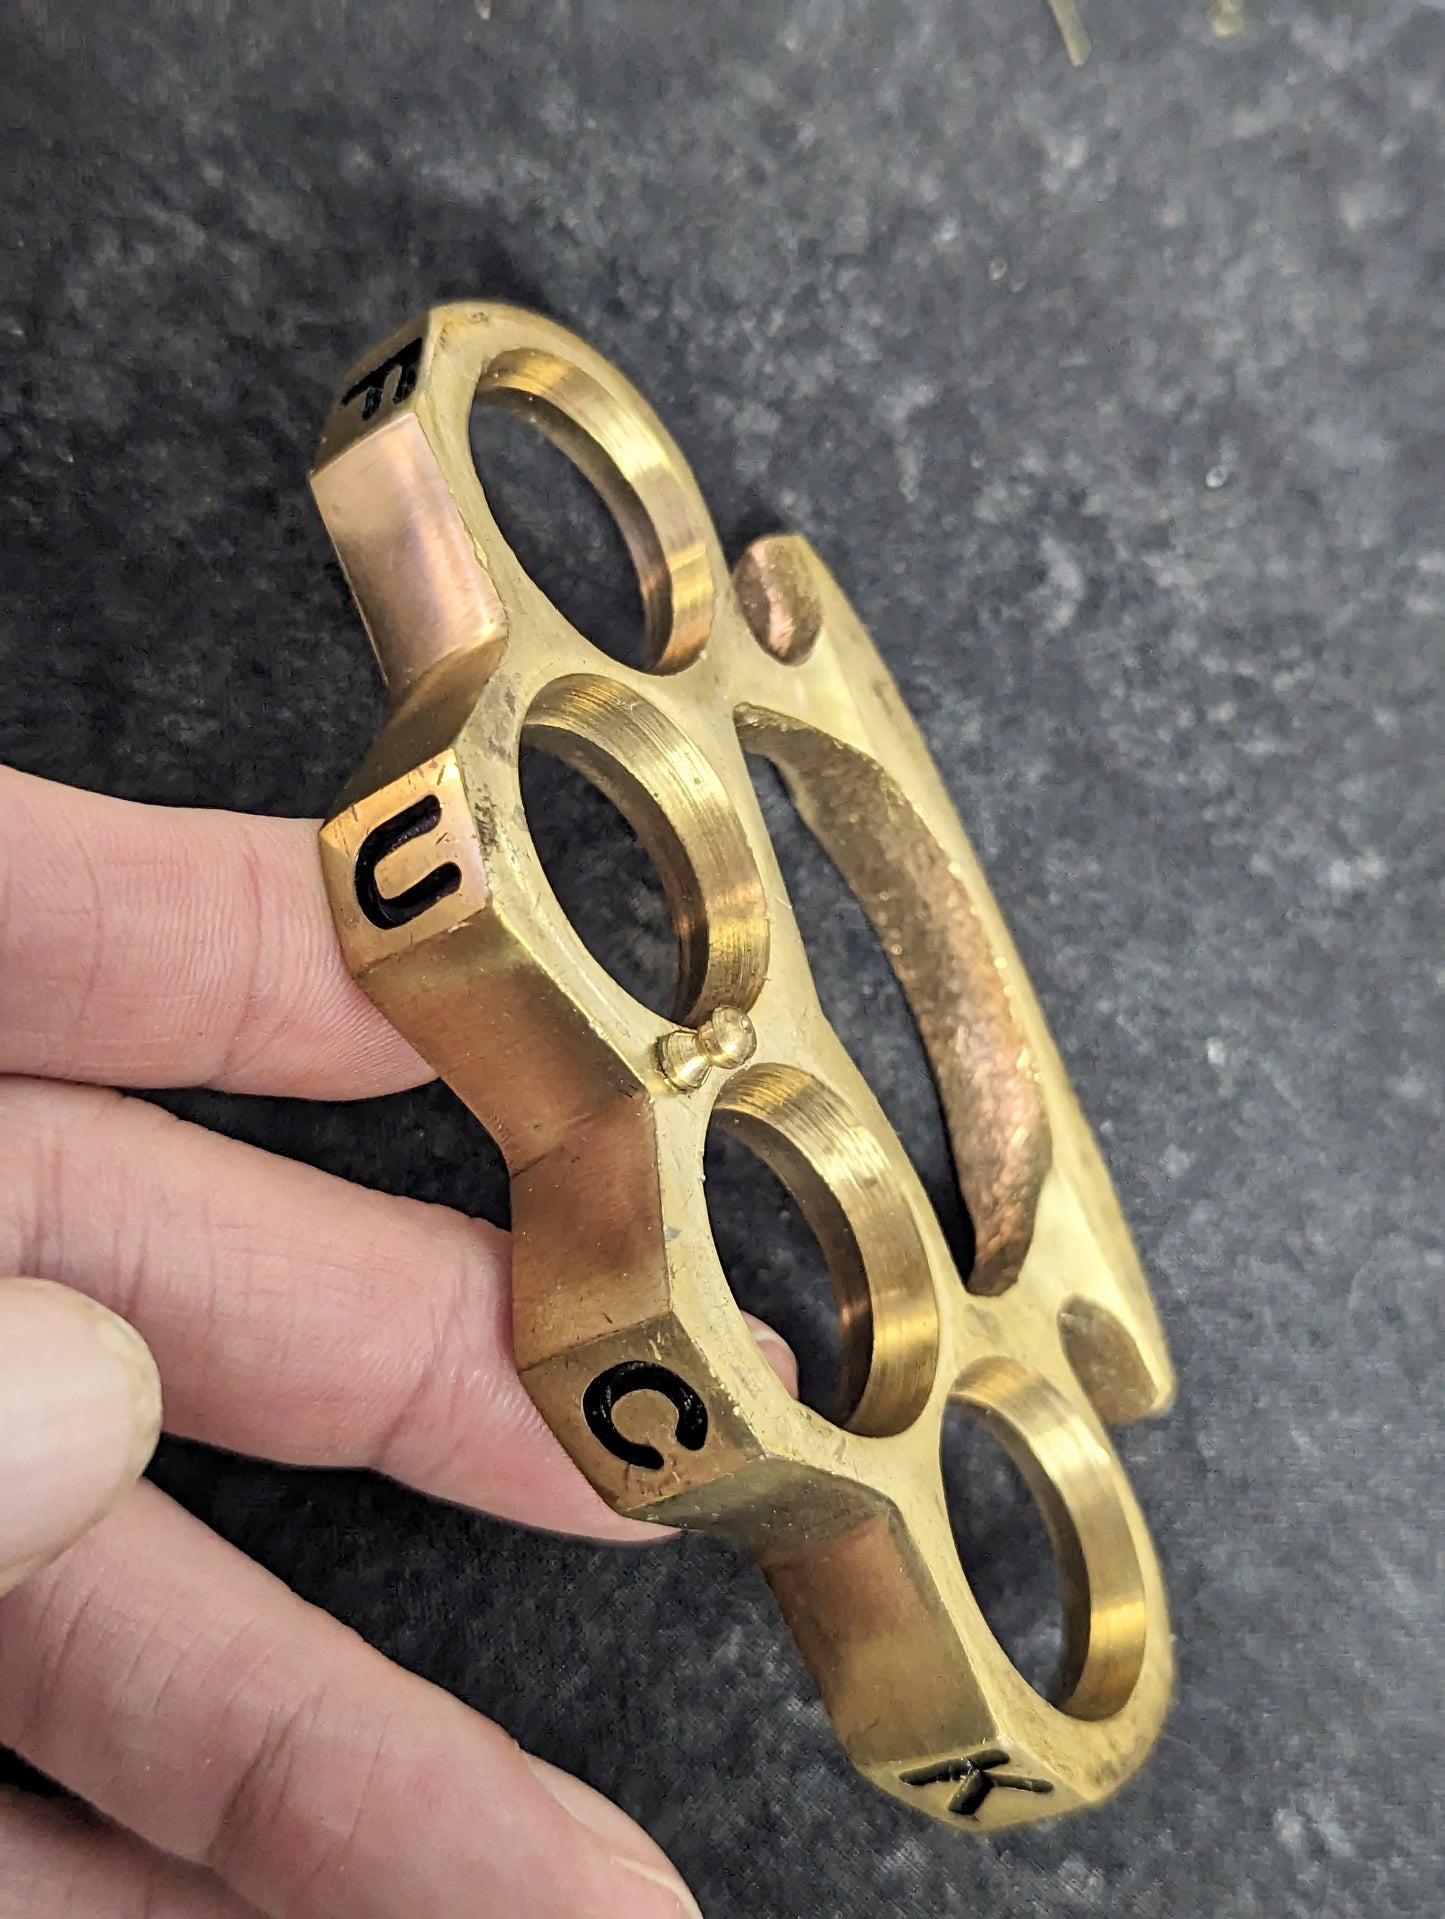 FUK CASTED BRASS SQUARE TOP KNUCKLE DUSTER